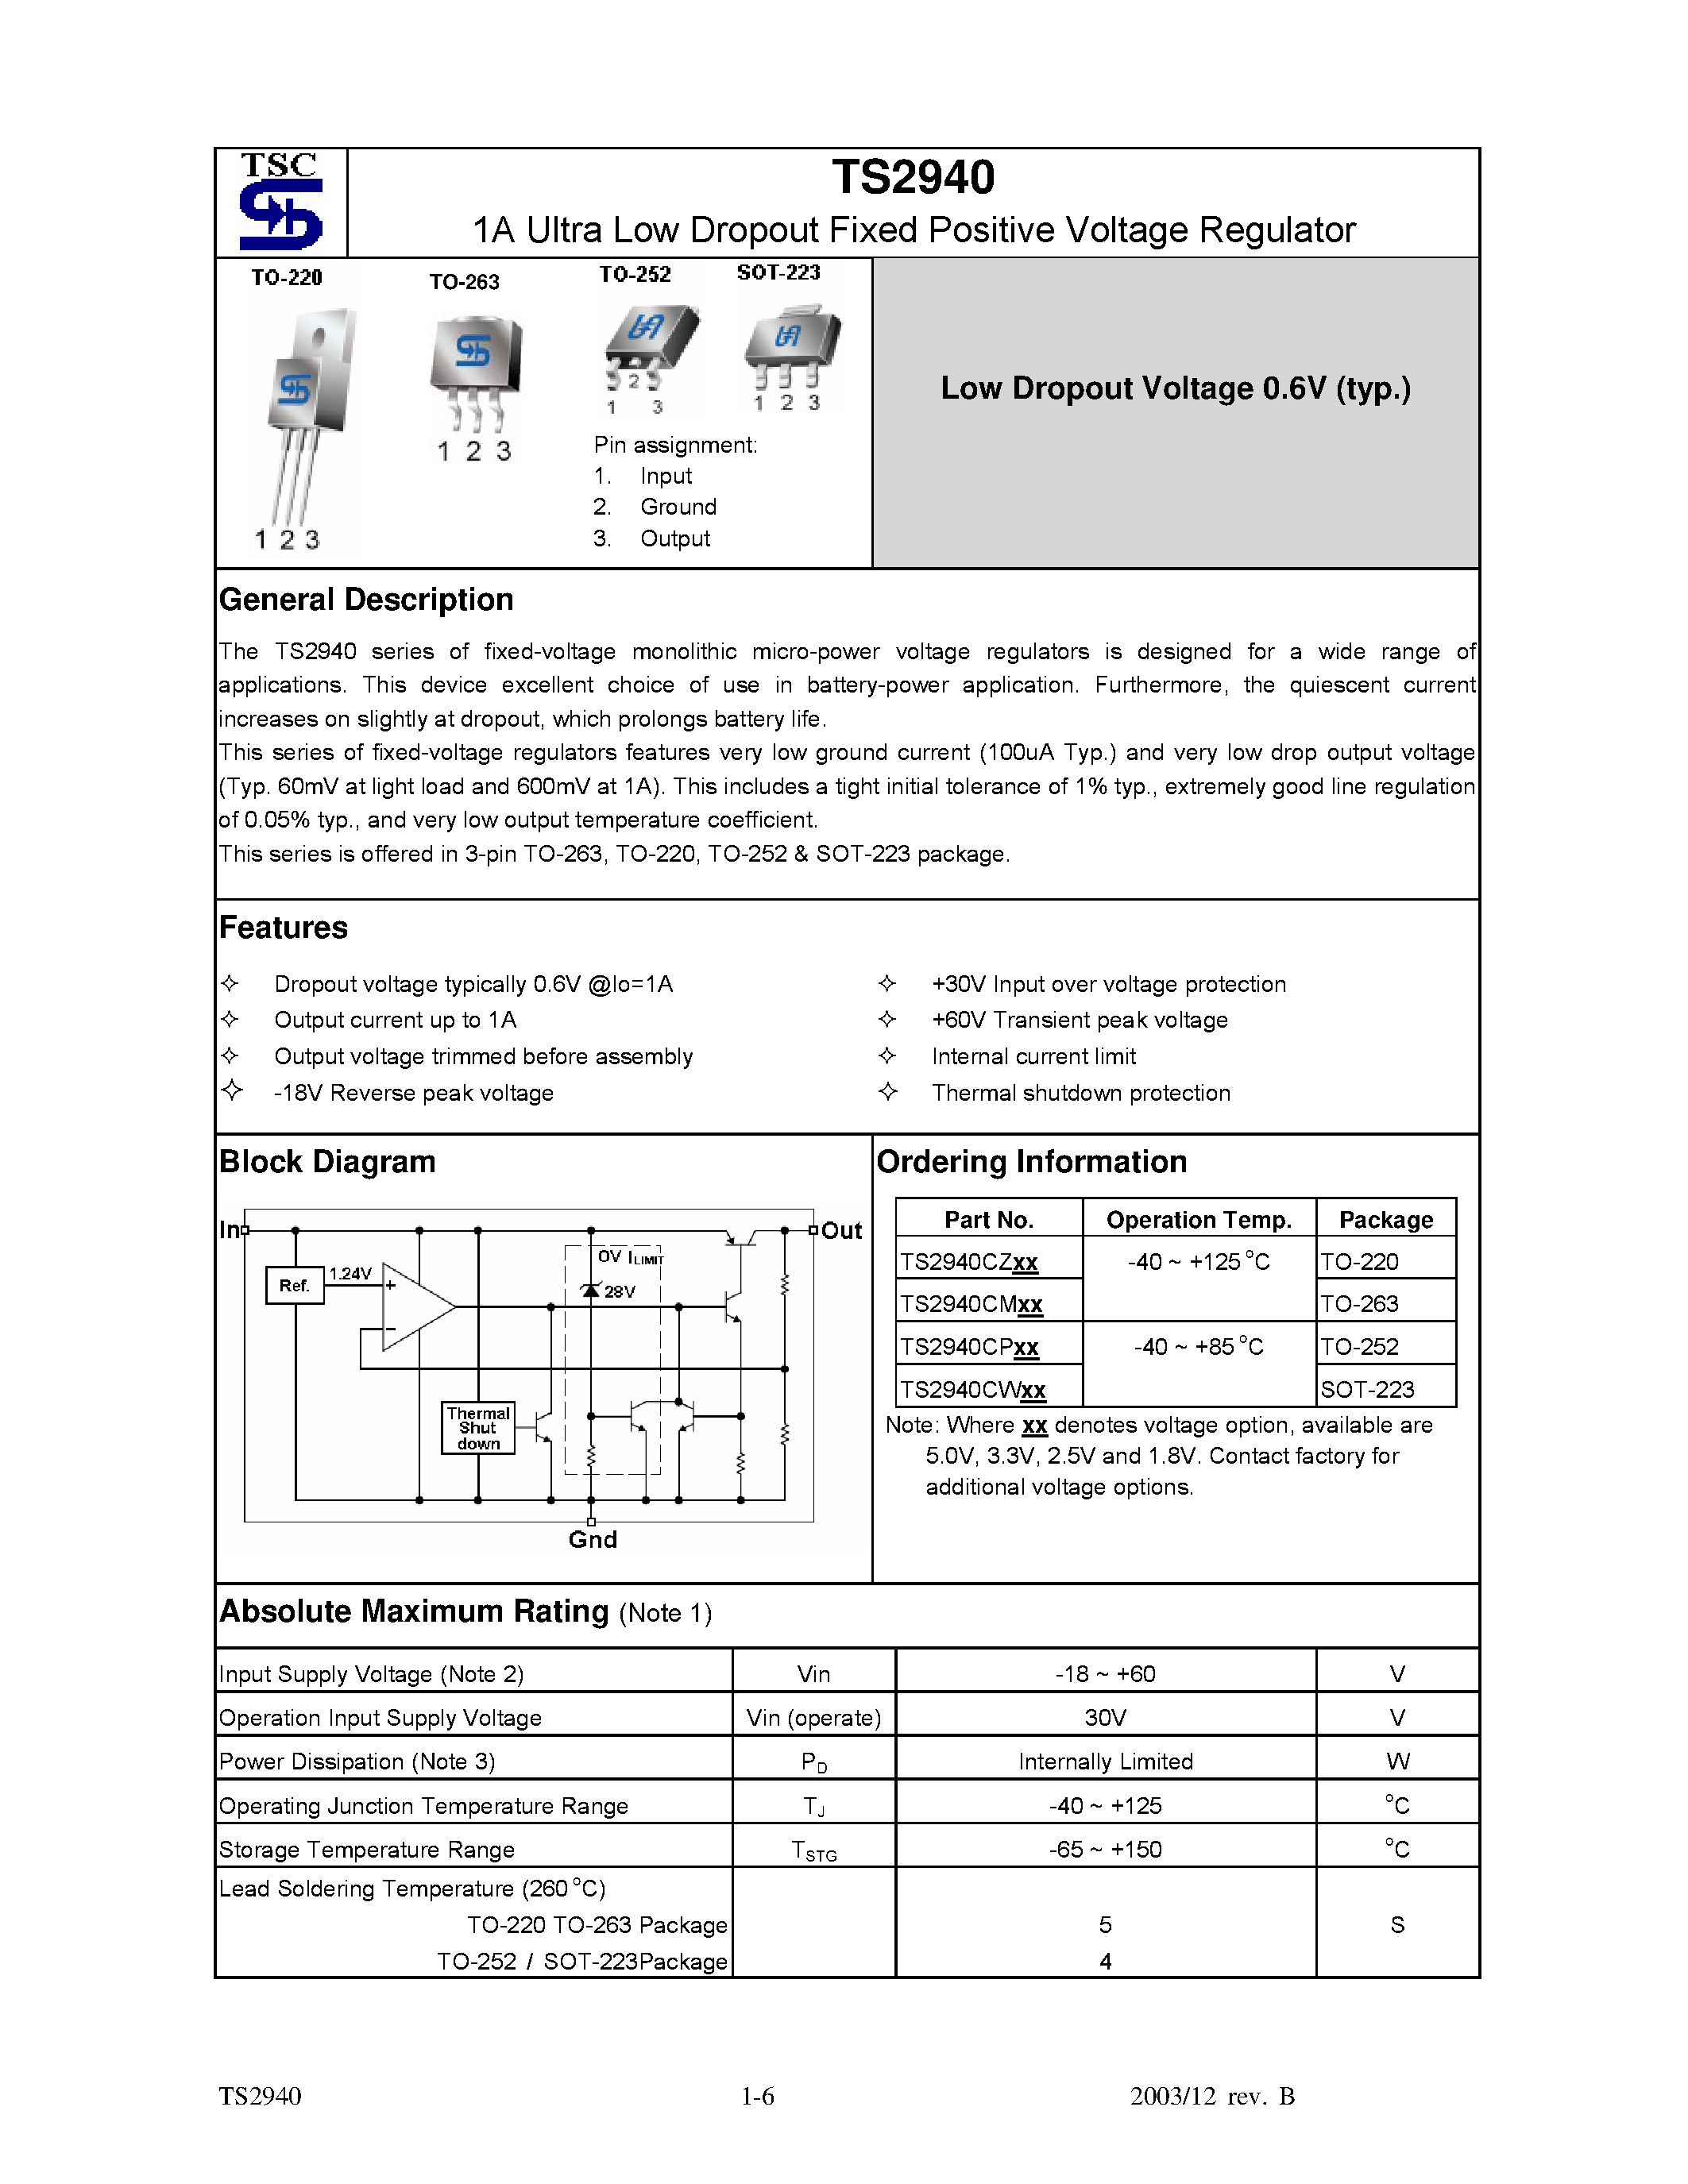 Datasheet TS2940 - 1A Ultra Low Dropout Fixed Positive Voltage Regulator page 1